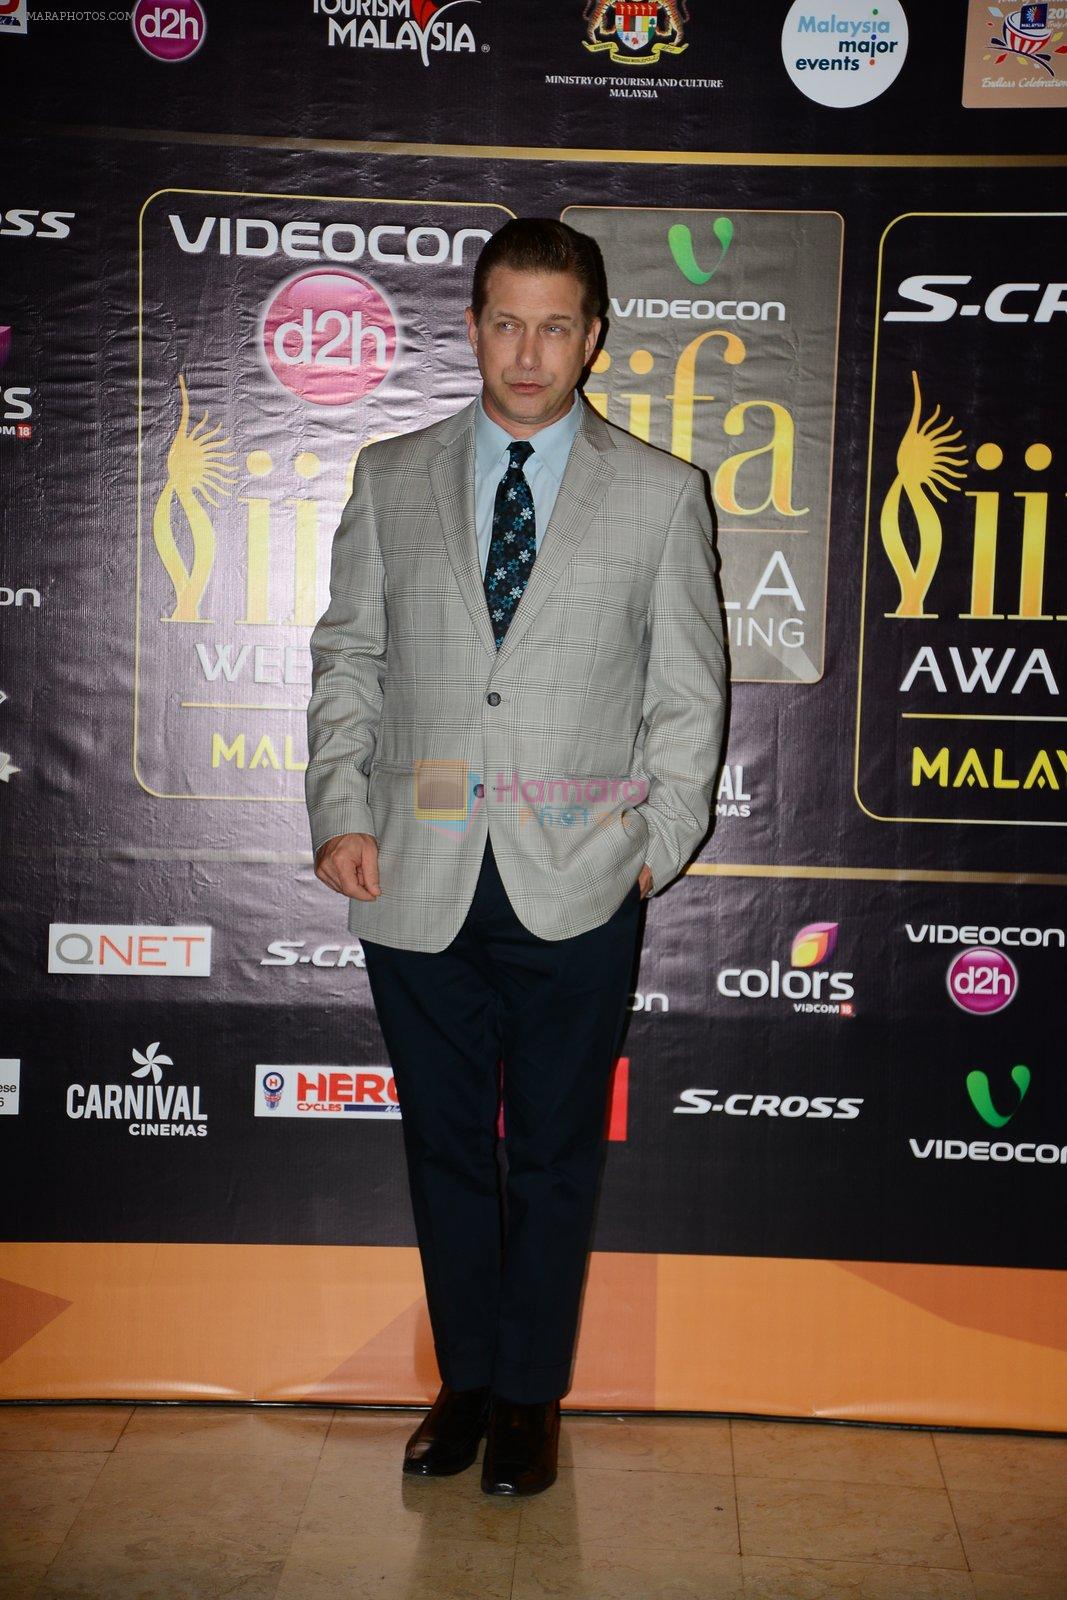 at Dil Dhadakne Do premiere at IIFA Awards on 6th June 2015